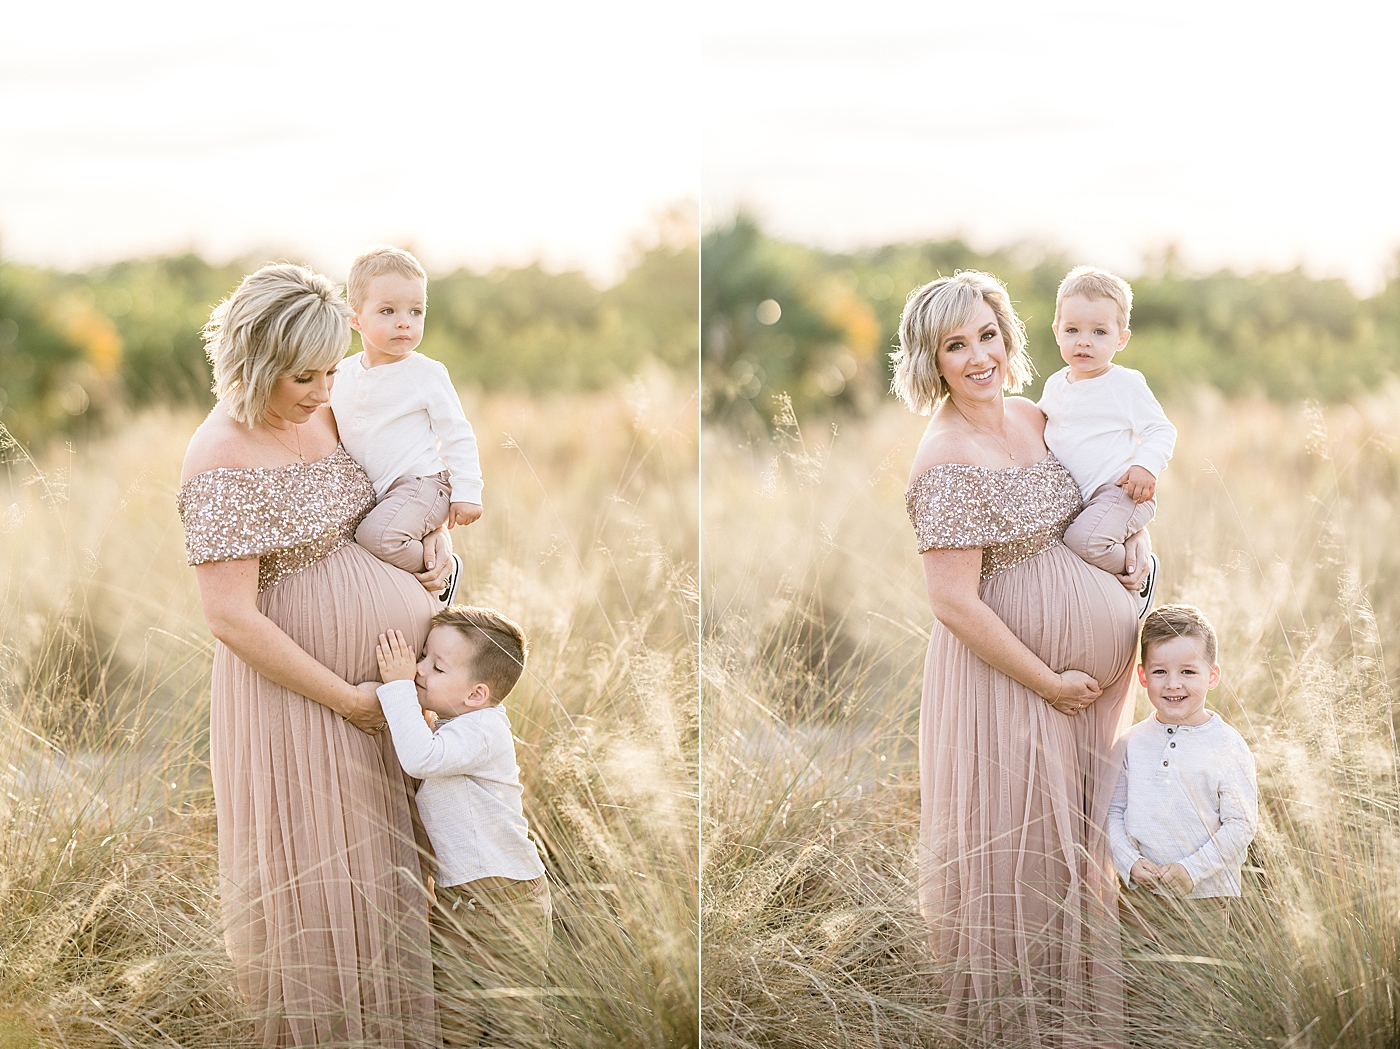 Maternity session at Cypress Point Park with Brittany Elise Photography.